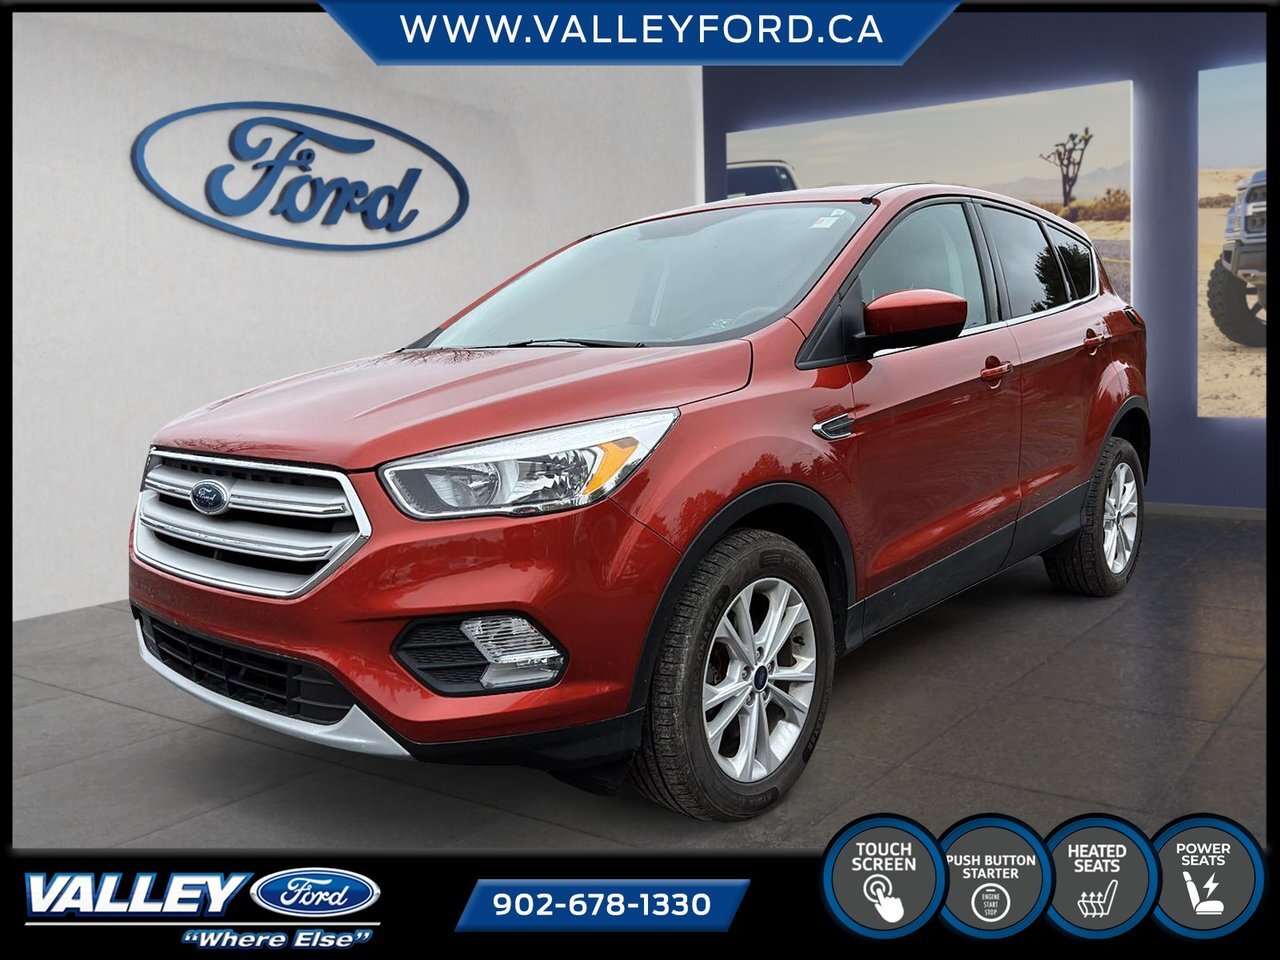 2019 Ford Escape SE HEATED FRONT SEATS